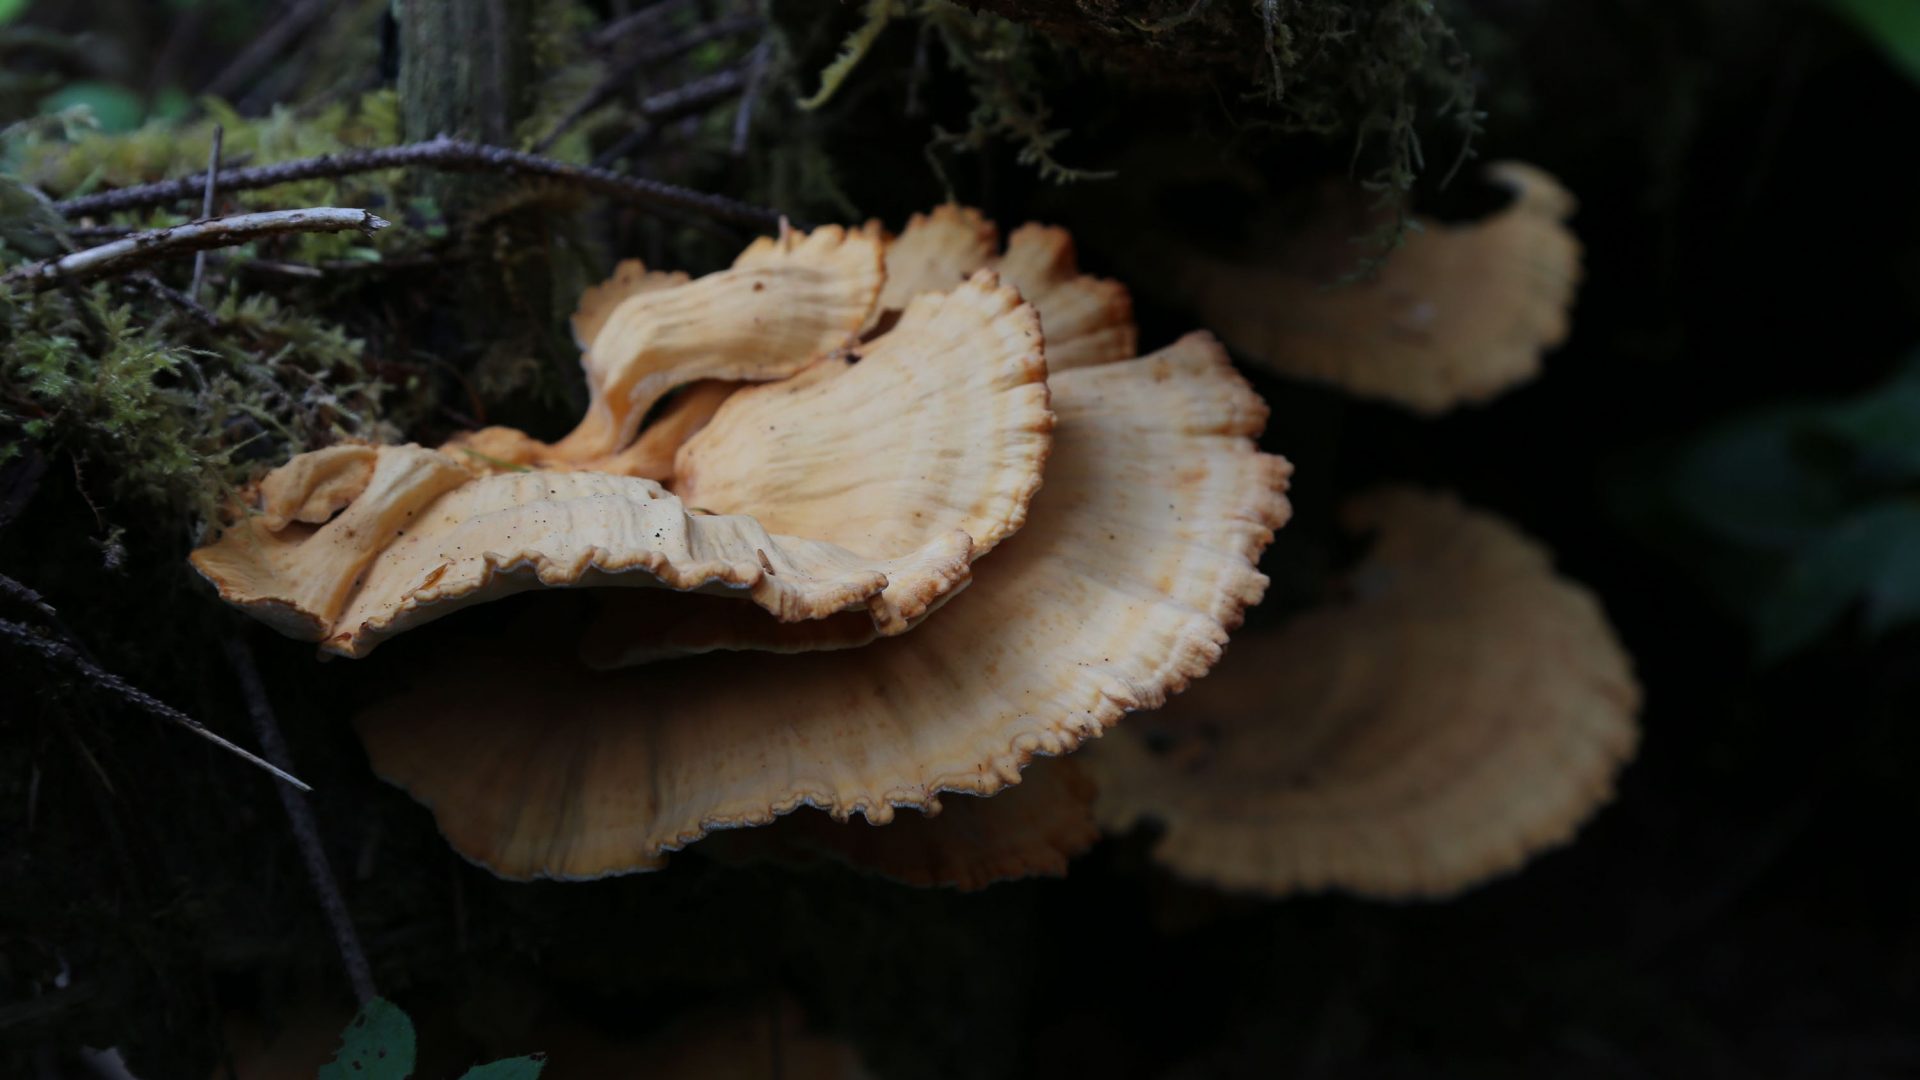 Chicken of the woods mushrooms sprout from the side of a mossy stump in the forests of Vancouver Island.